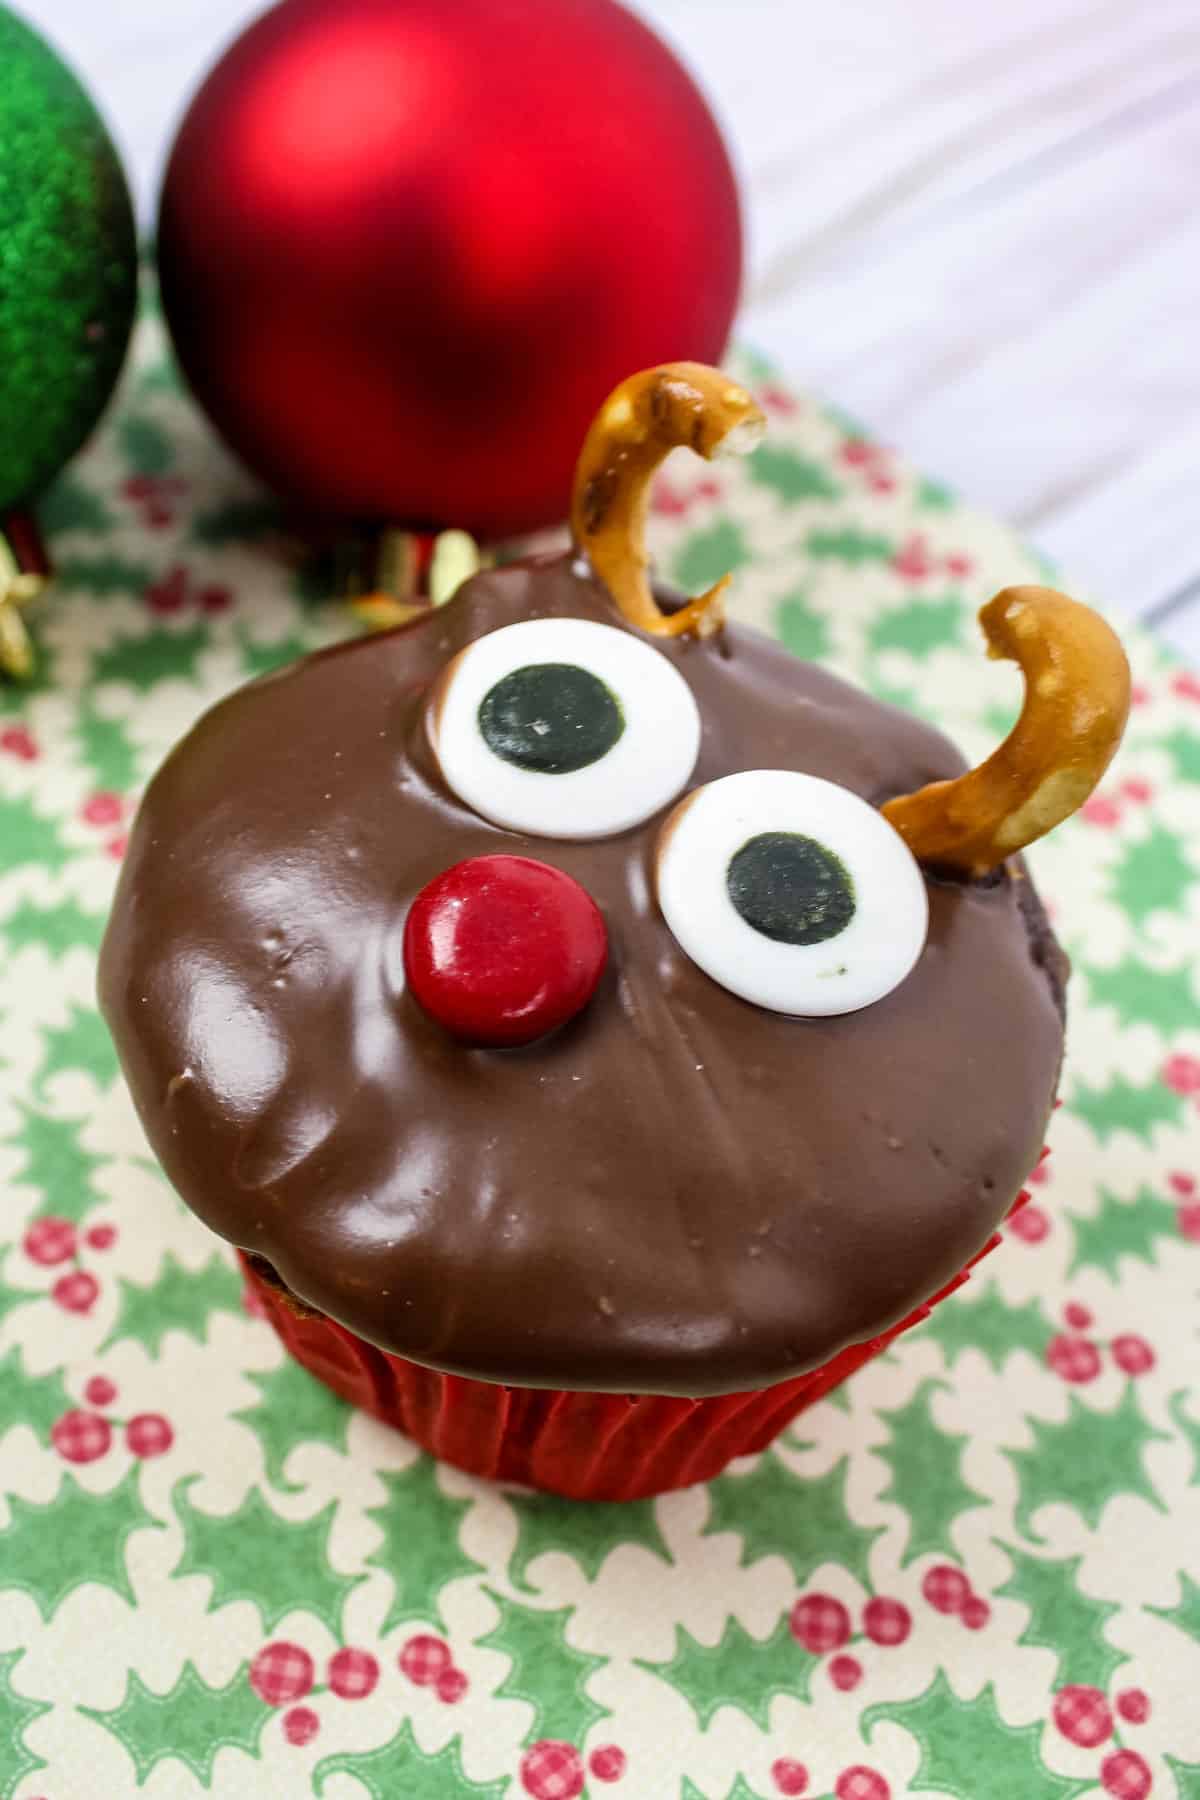 Chocolate cupcake with chocolate icing decorated with pretzel antlers, candy eyes, and a red m&m, to look like Rudolph the red nose reindeer.